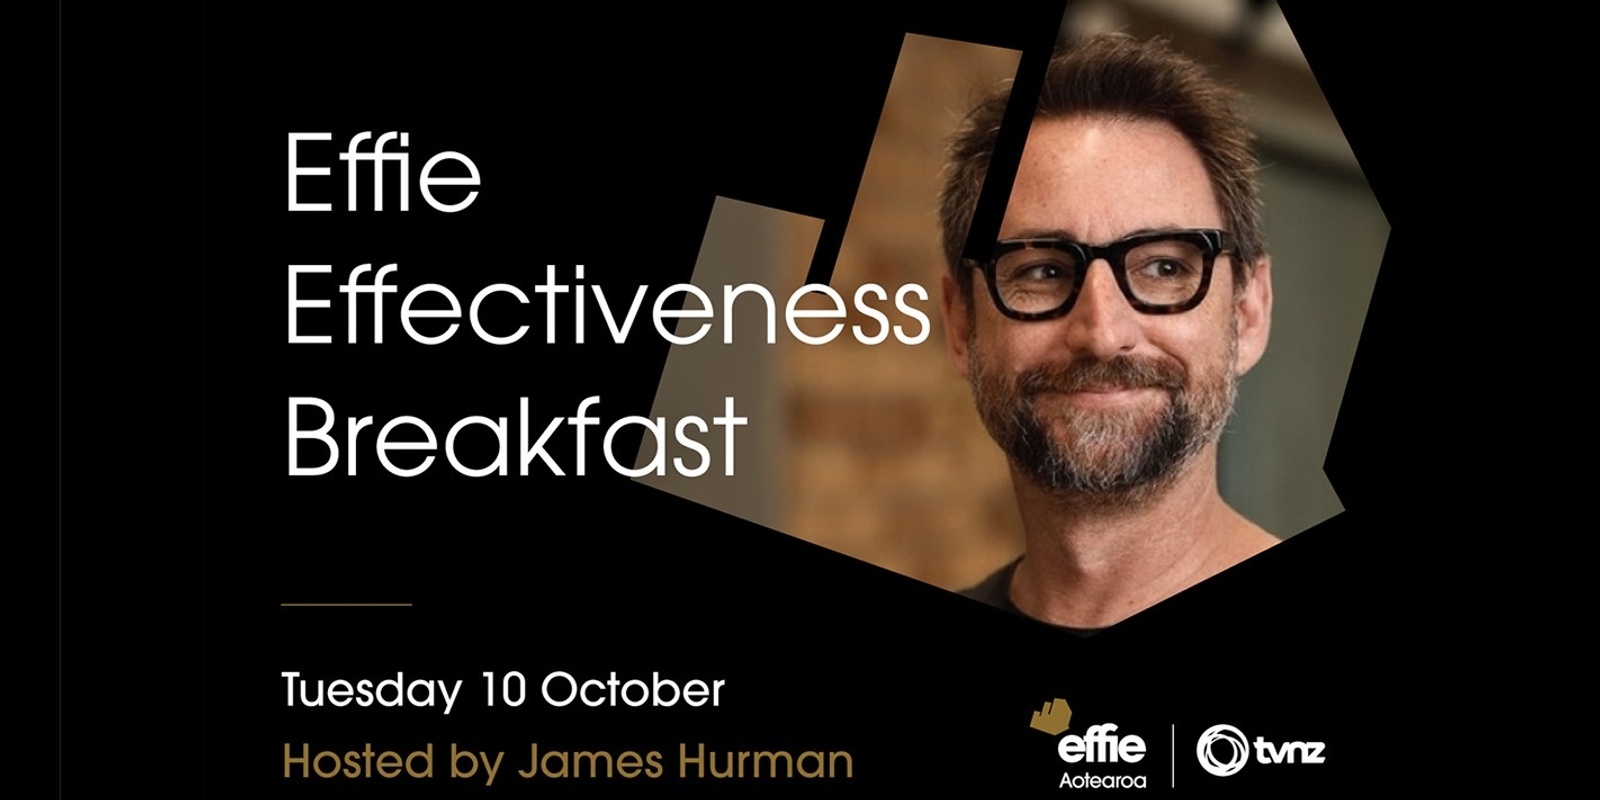 Banner image for Effie Effectiveness Breakfast hosted by James Hurman